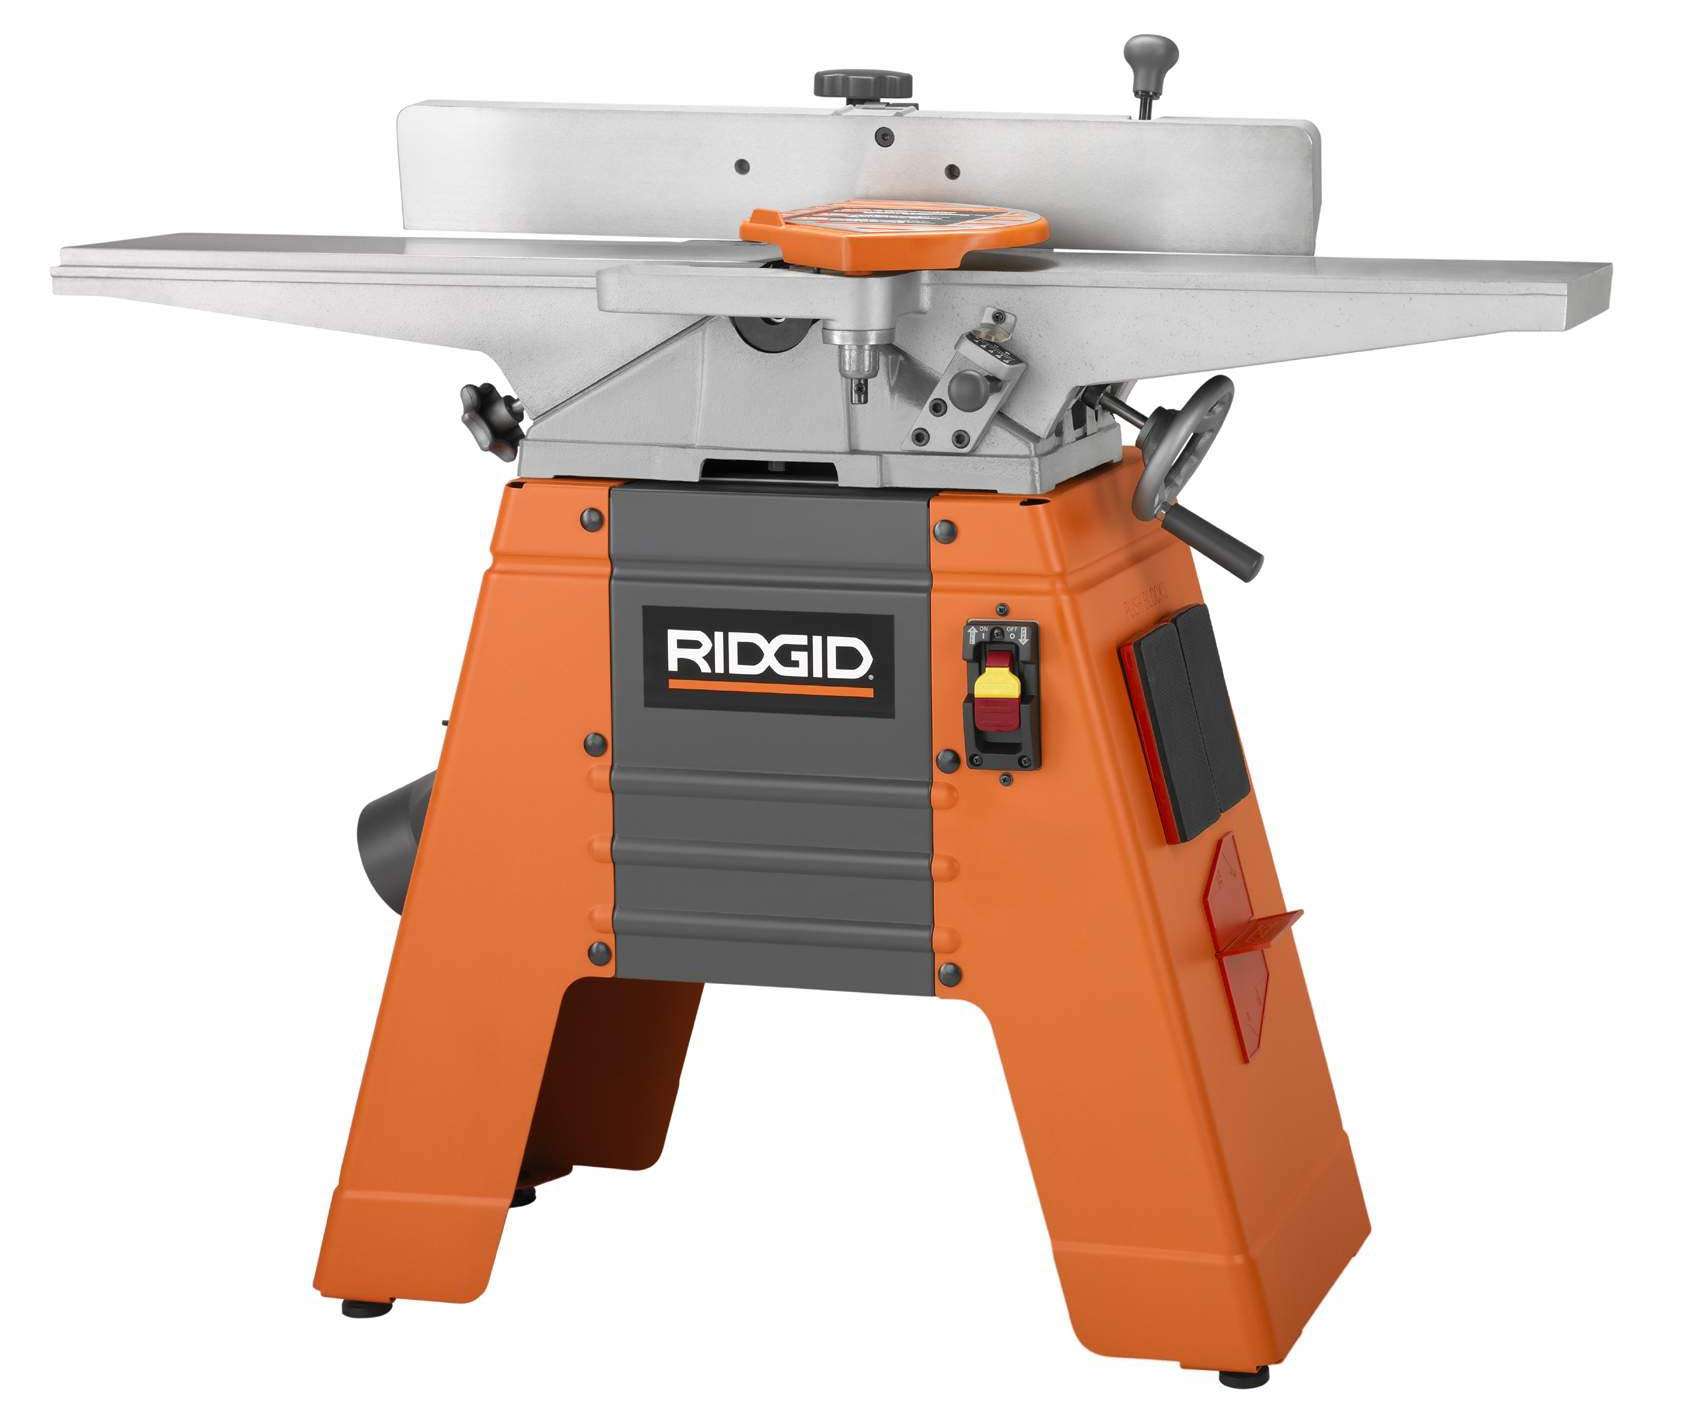 Jointer Planer from Ridgid Offers Power and Versatility